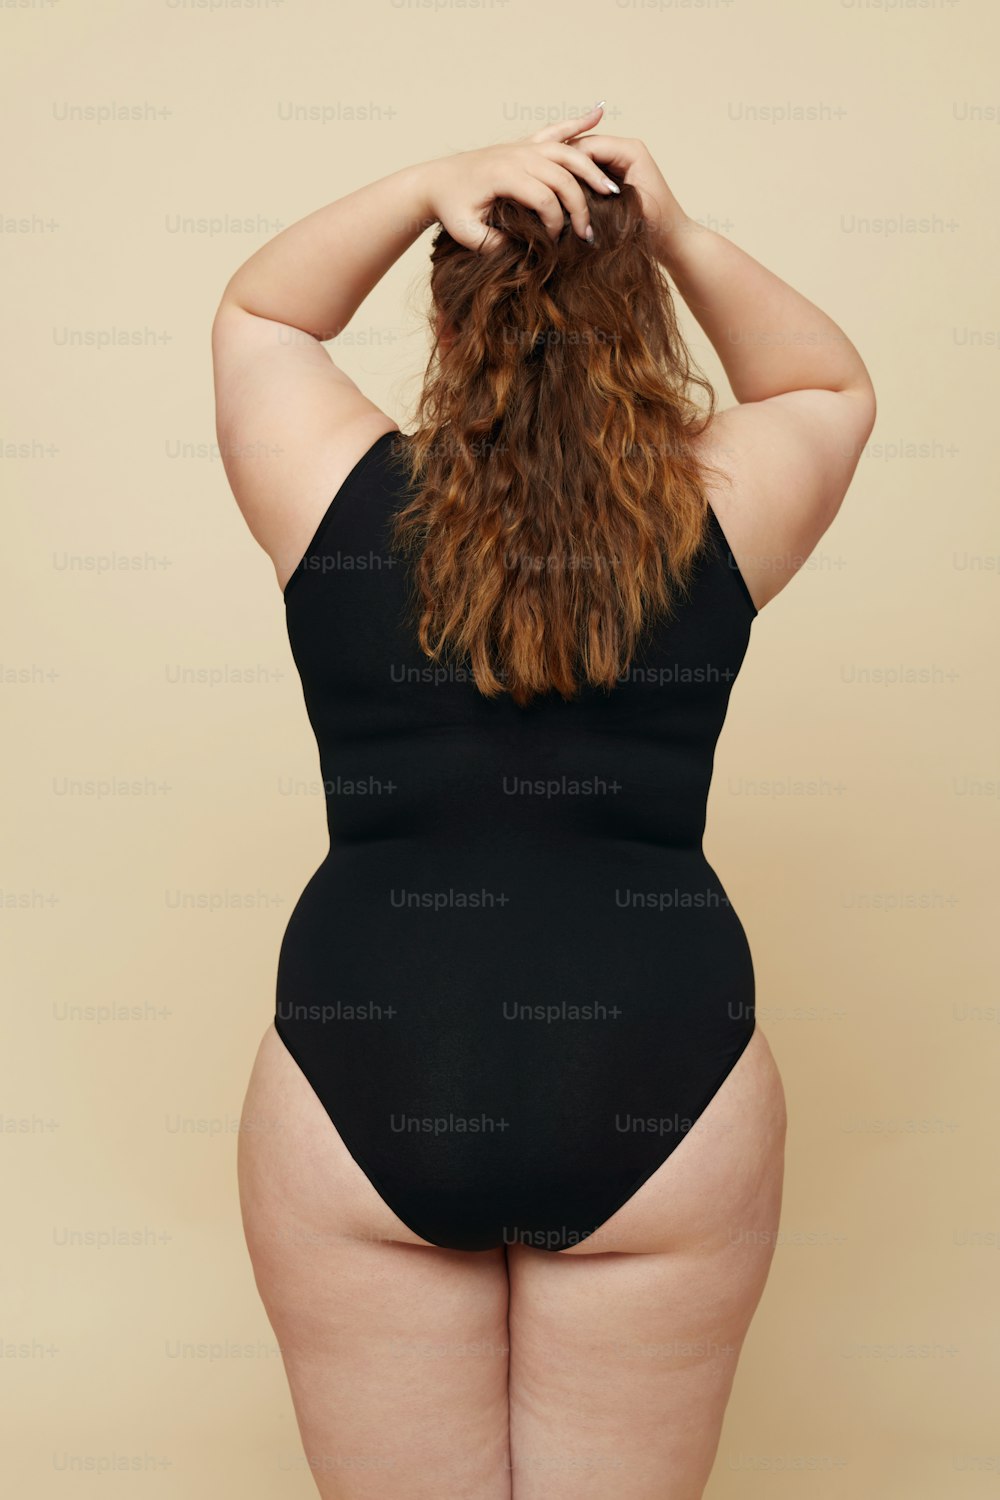 Plus Size Model. Woman From Back Portrait. Full-figured Brunette In Back Bodysuit Keeping Hands On Head And Touching Hair. Body Positive Concept On Beige Background.